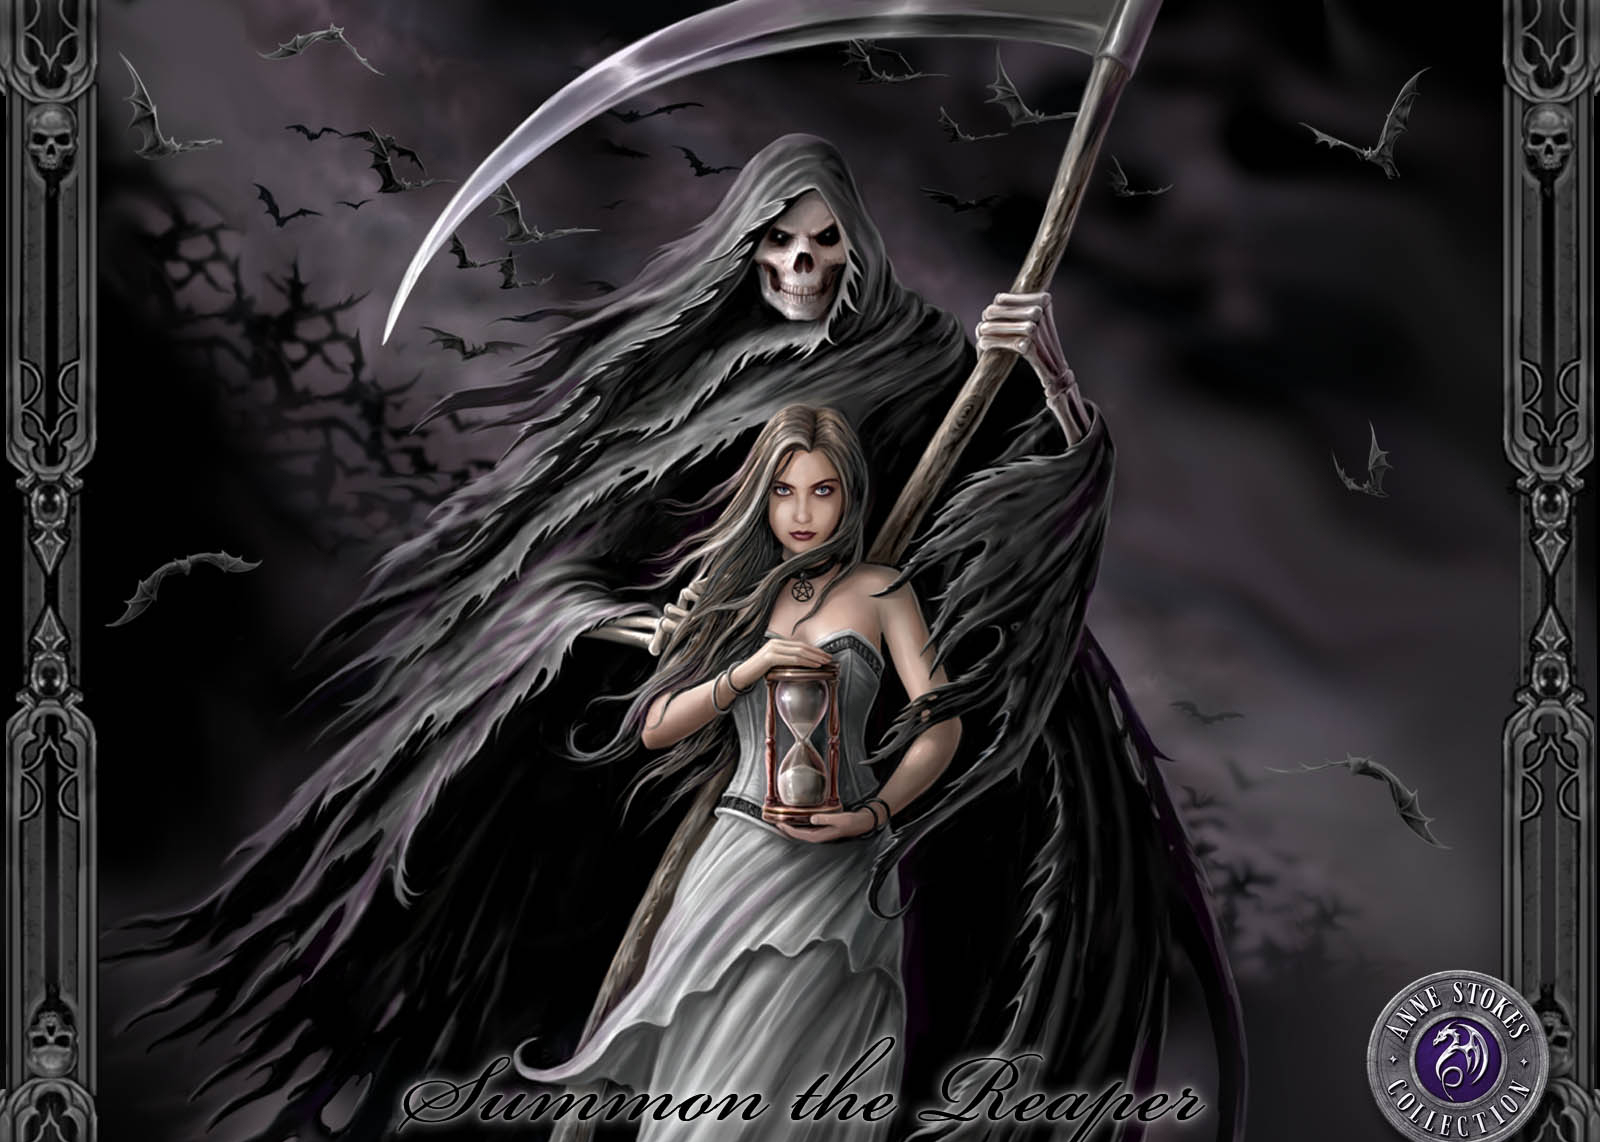 Dark and foreboding, Time's Up represents the Grim Reaper in stunning detail by Anne Stokes.